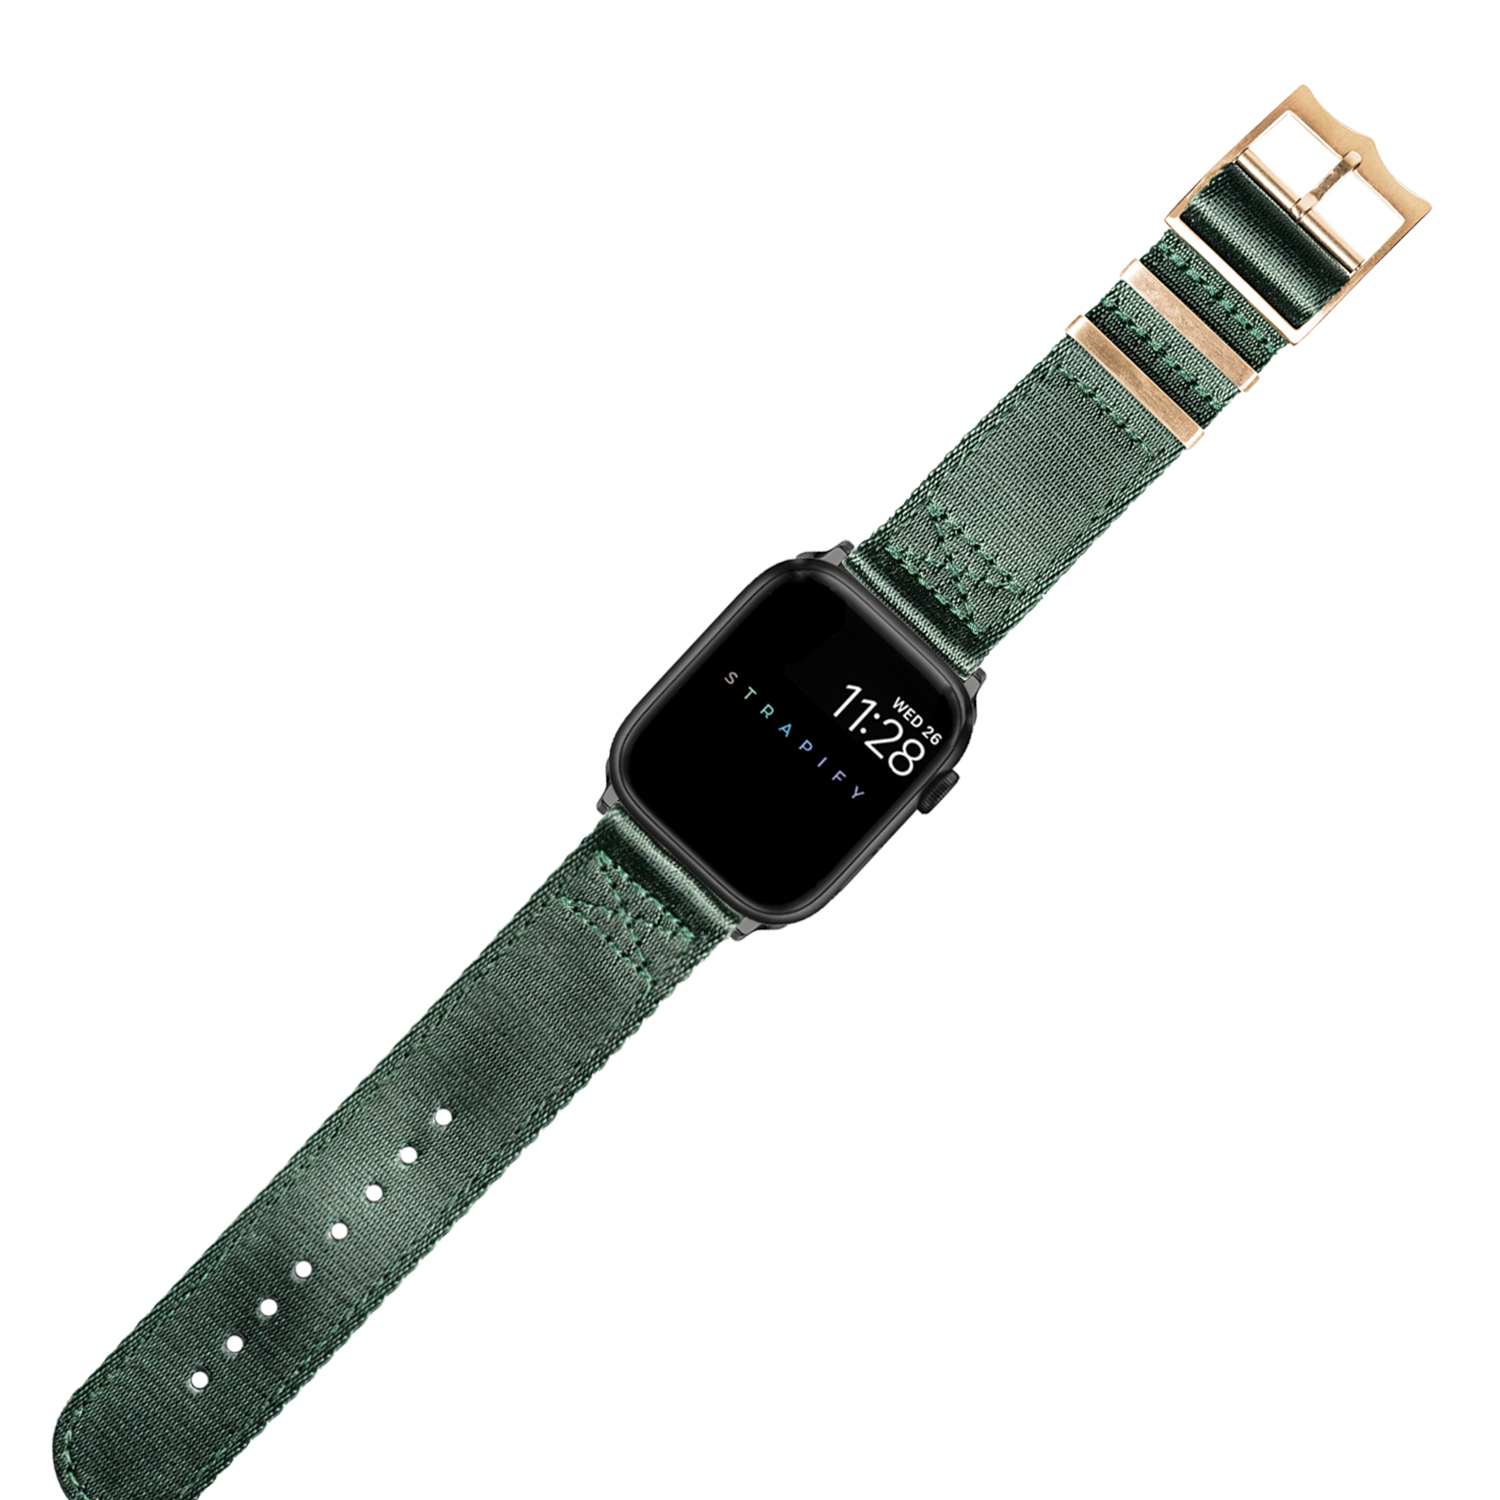 [Apple Watch] Ultra Militex - Forest Green [Rose Gold Hardware]